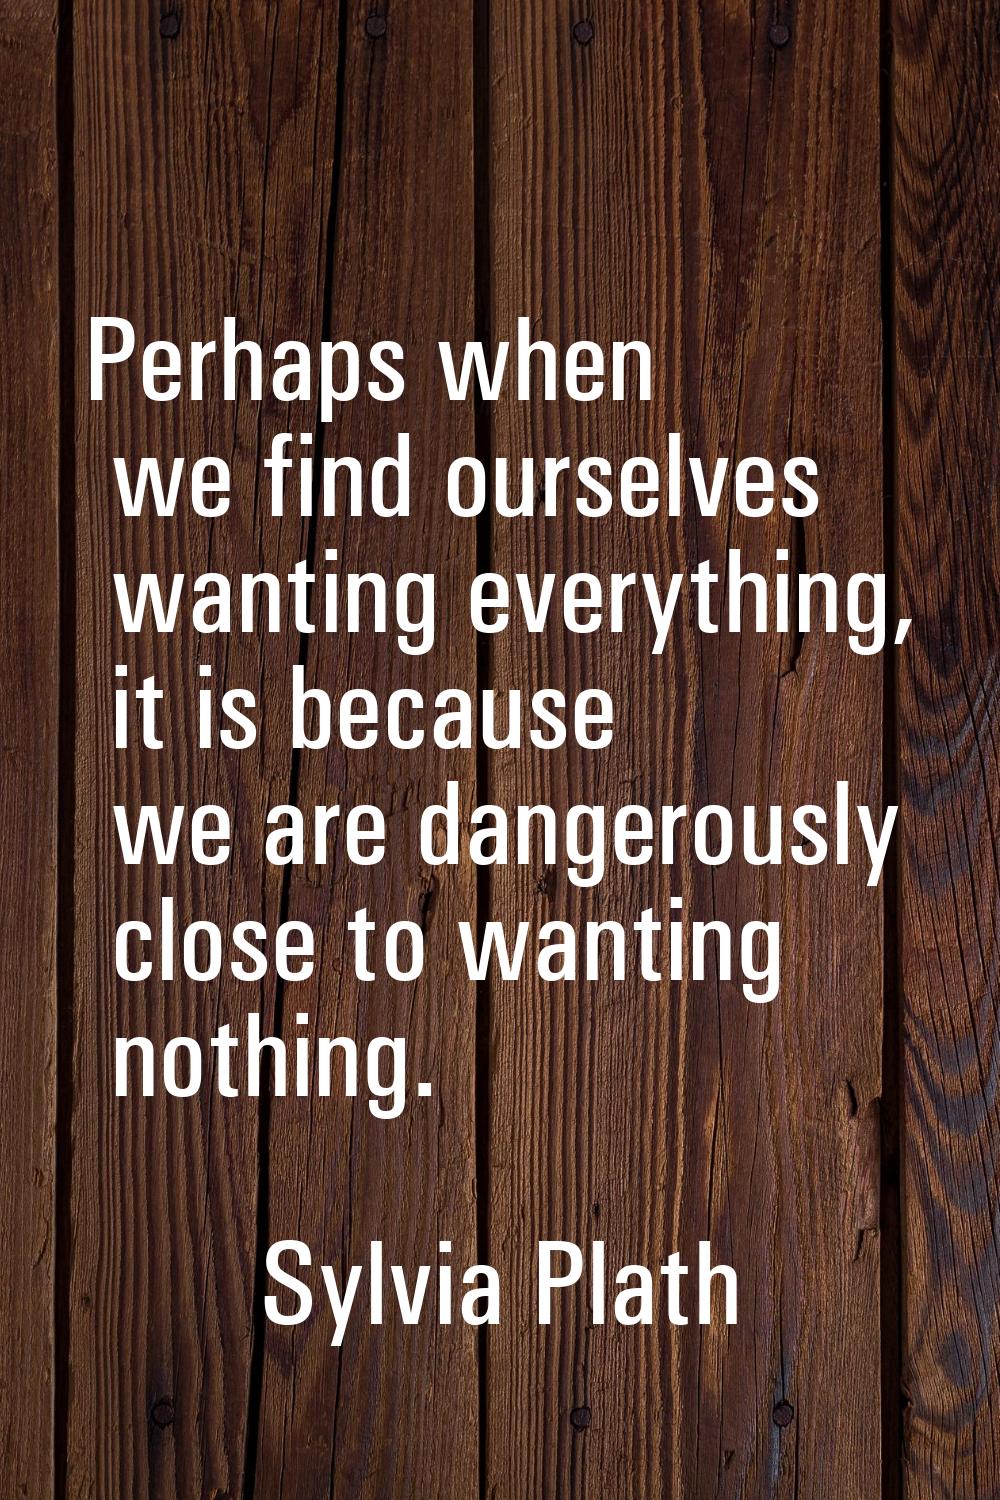 Perhaps when we find ourselves wanting everything, it is because we are dangerously close to wantin